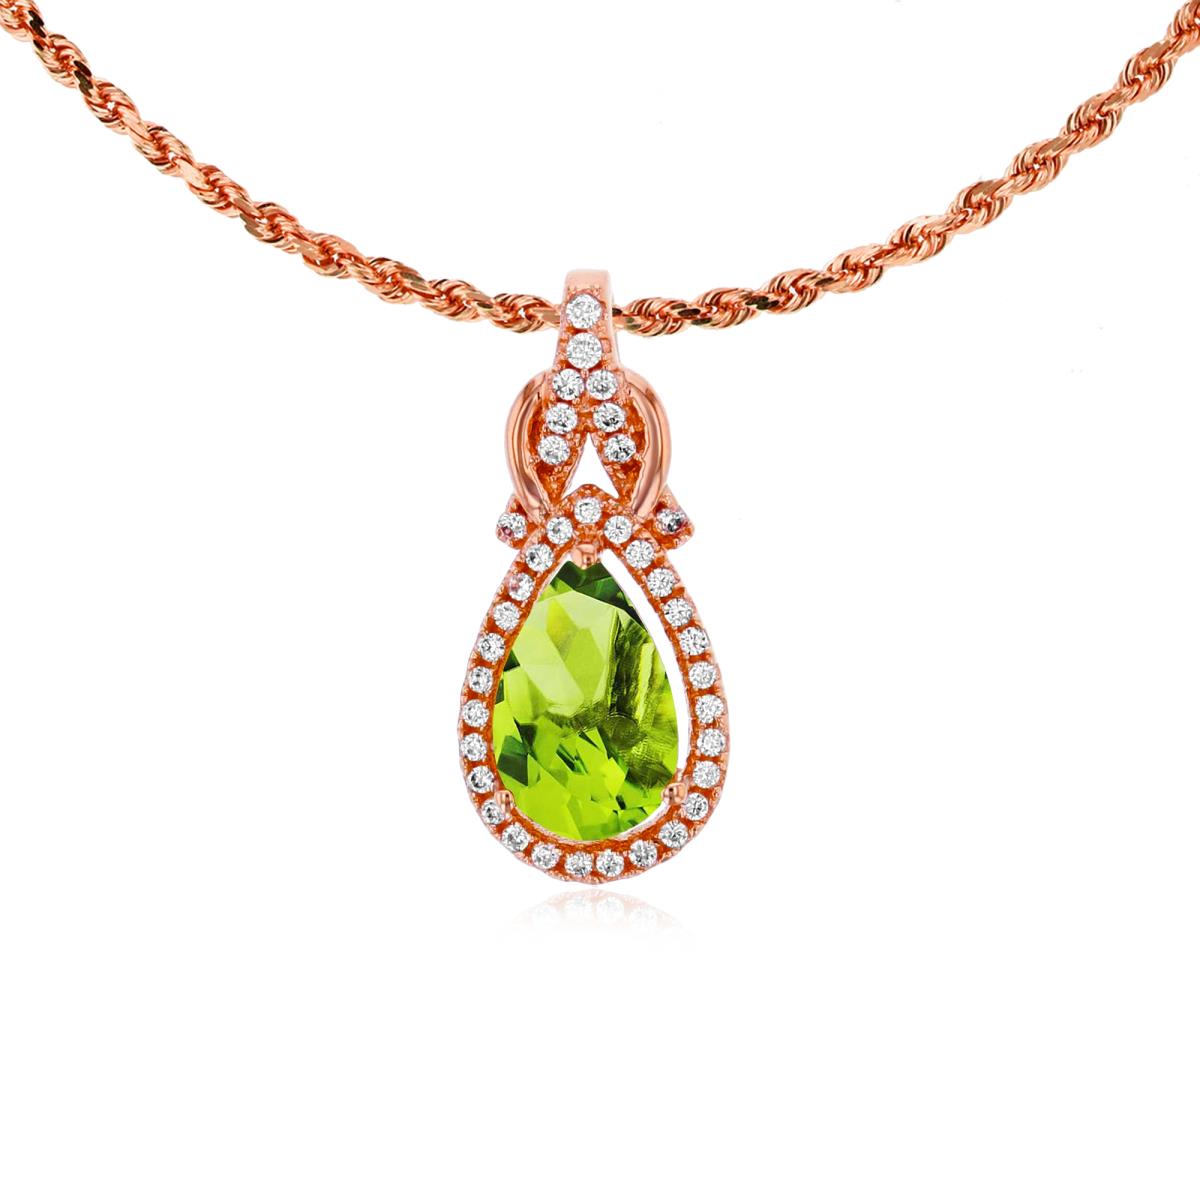 10K Rose Gold 8x5mm Pear Cut Peridot & 0.11 CTTW Rnd Diamond Knot 18" Rope Chain Necklace